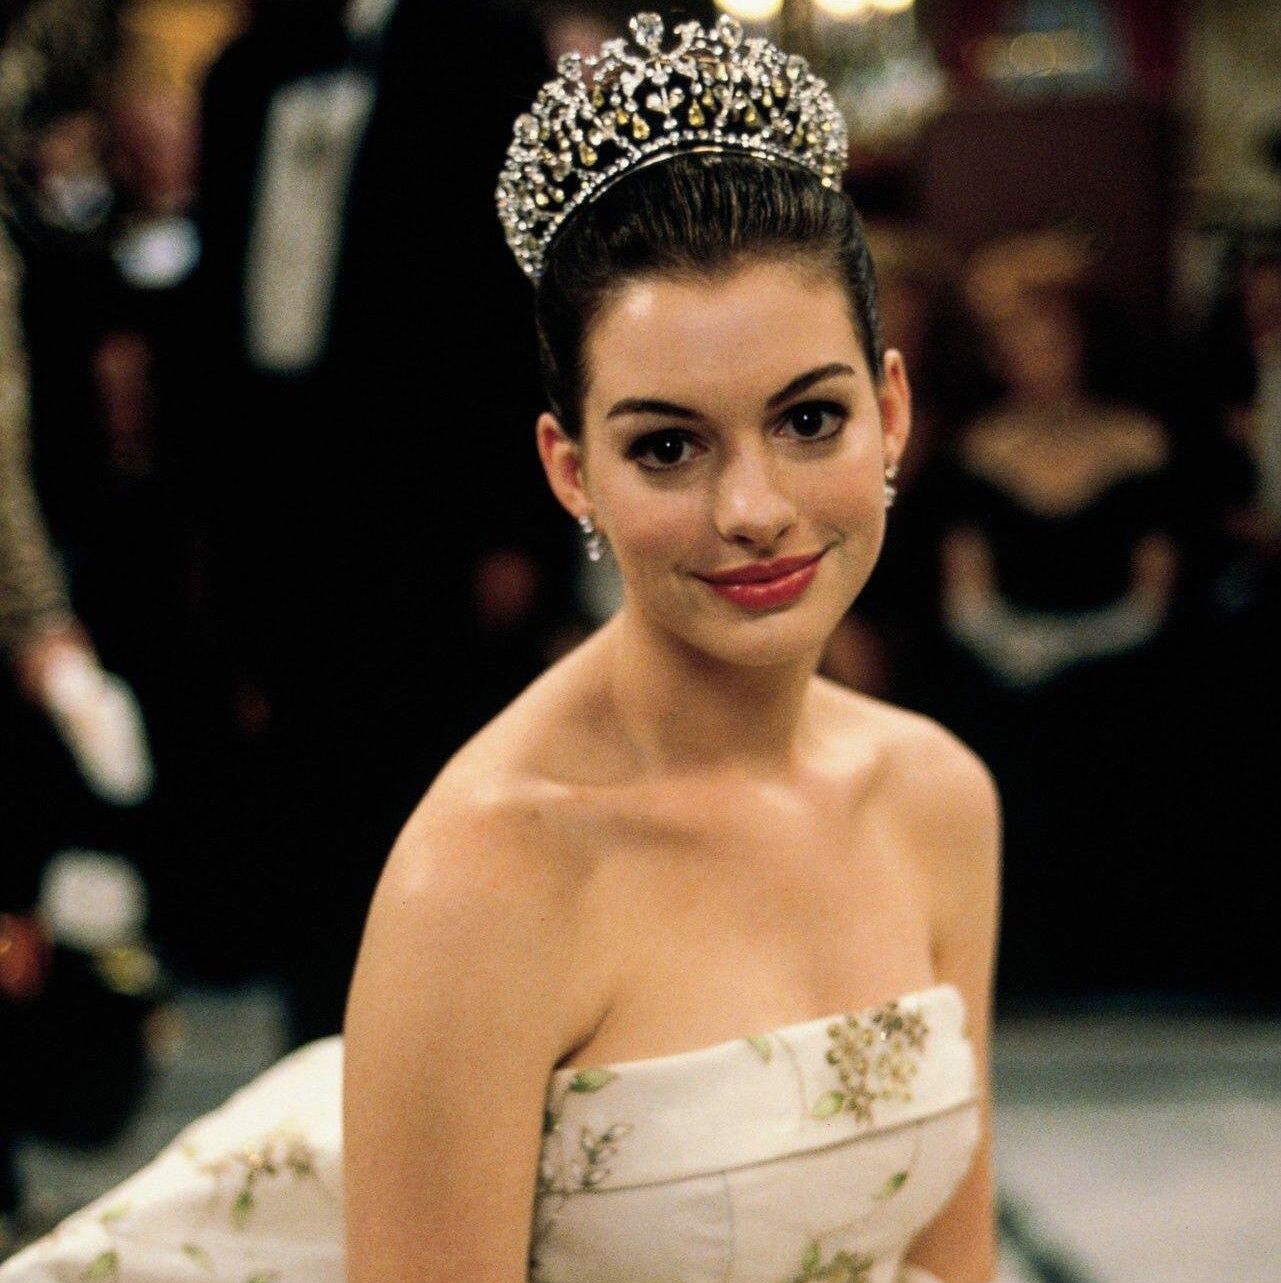 'The Princess Diaries 3' Is Reportedly in the Works ... Without Anne Hathaway?